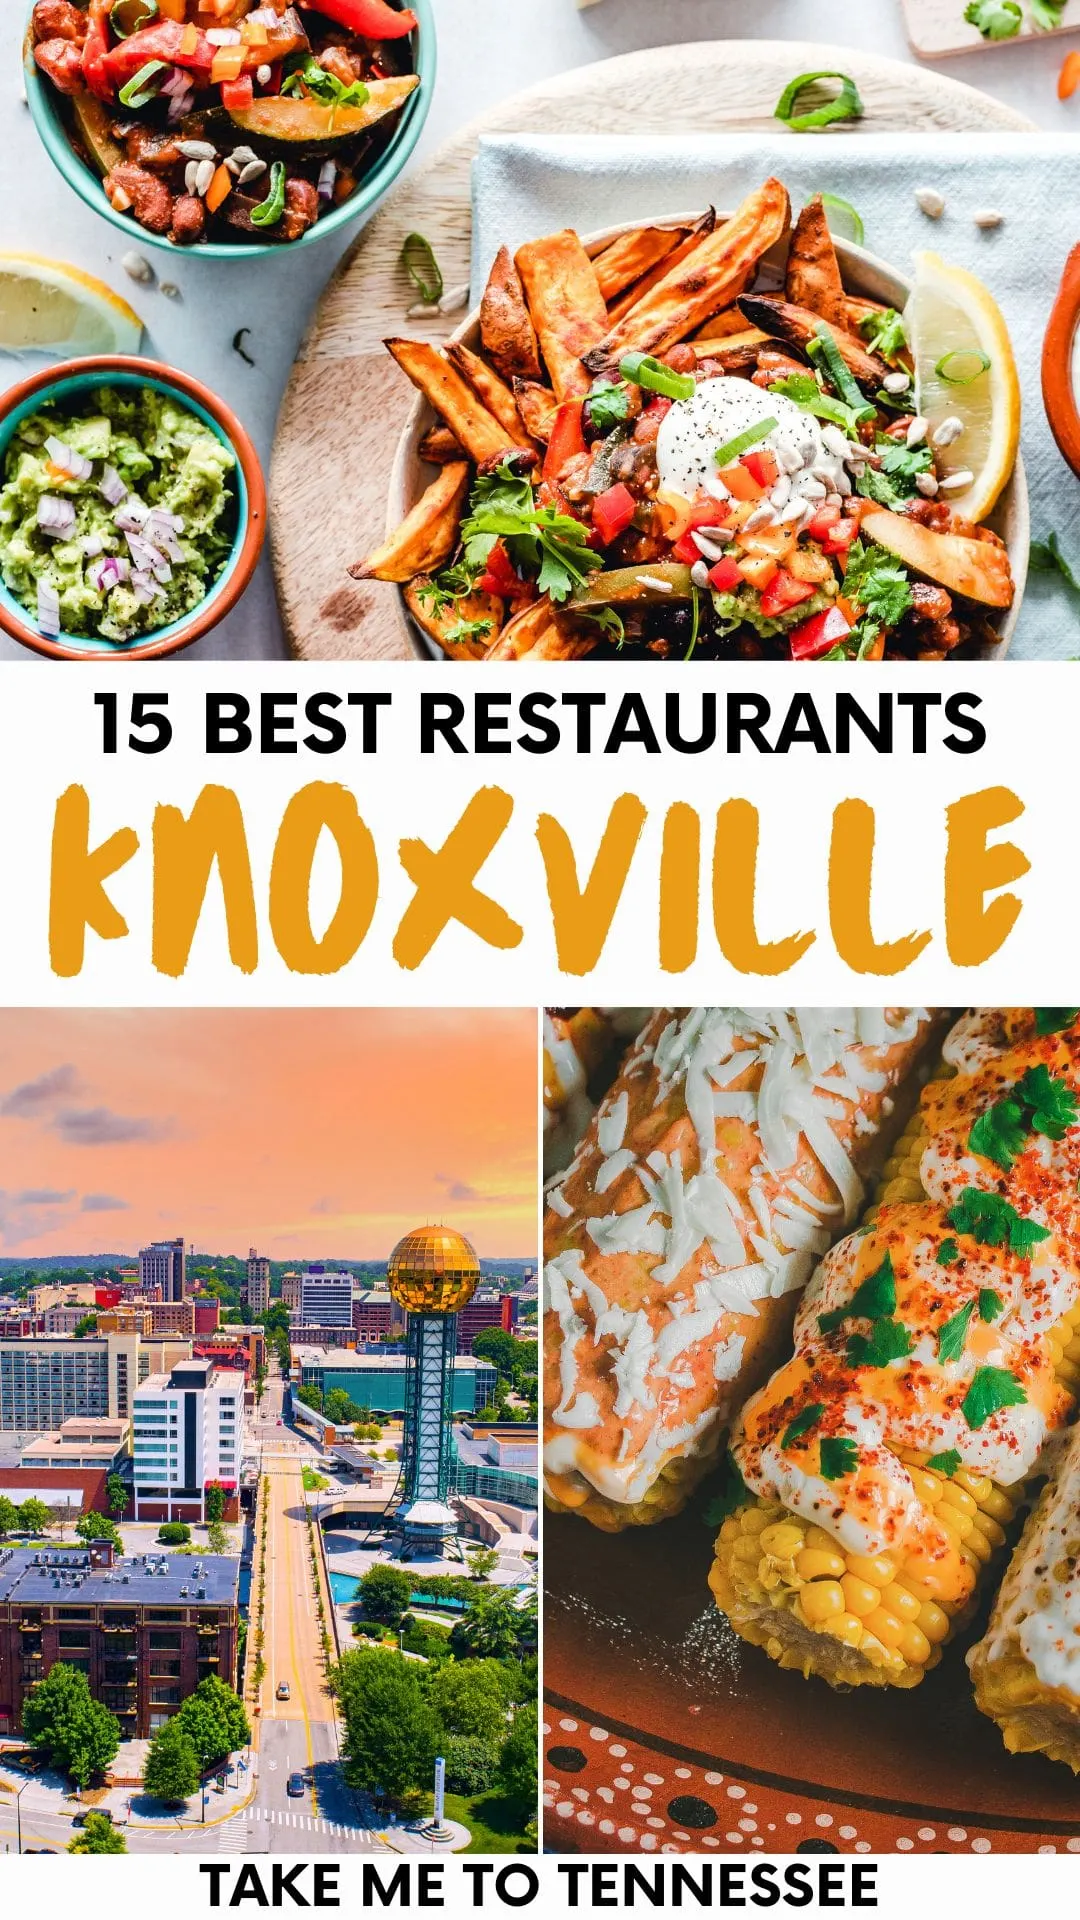 Gallery images of food and places to eat in Knoxville, Tennessee.